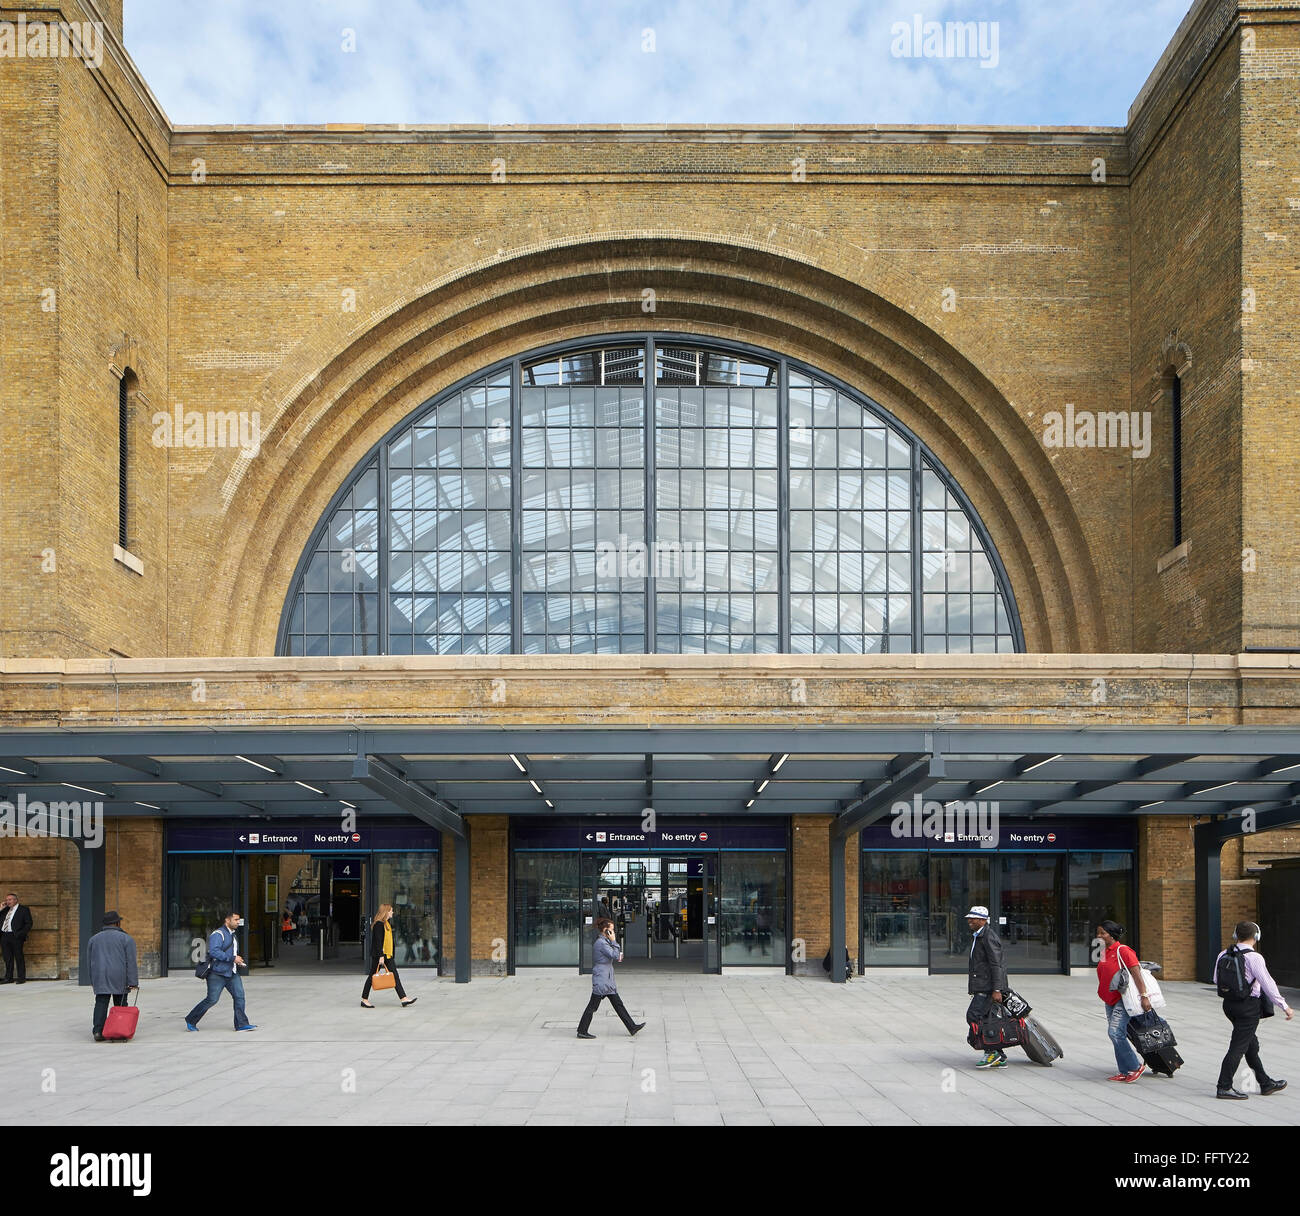 Detailed front elevation with arched window glazing. King's Cross Square, London, United Kingdom. Architect: Stanton Williams Ar Stock Photo